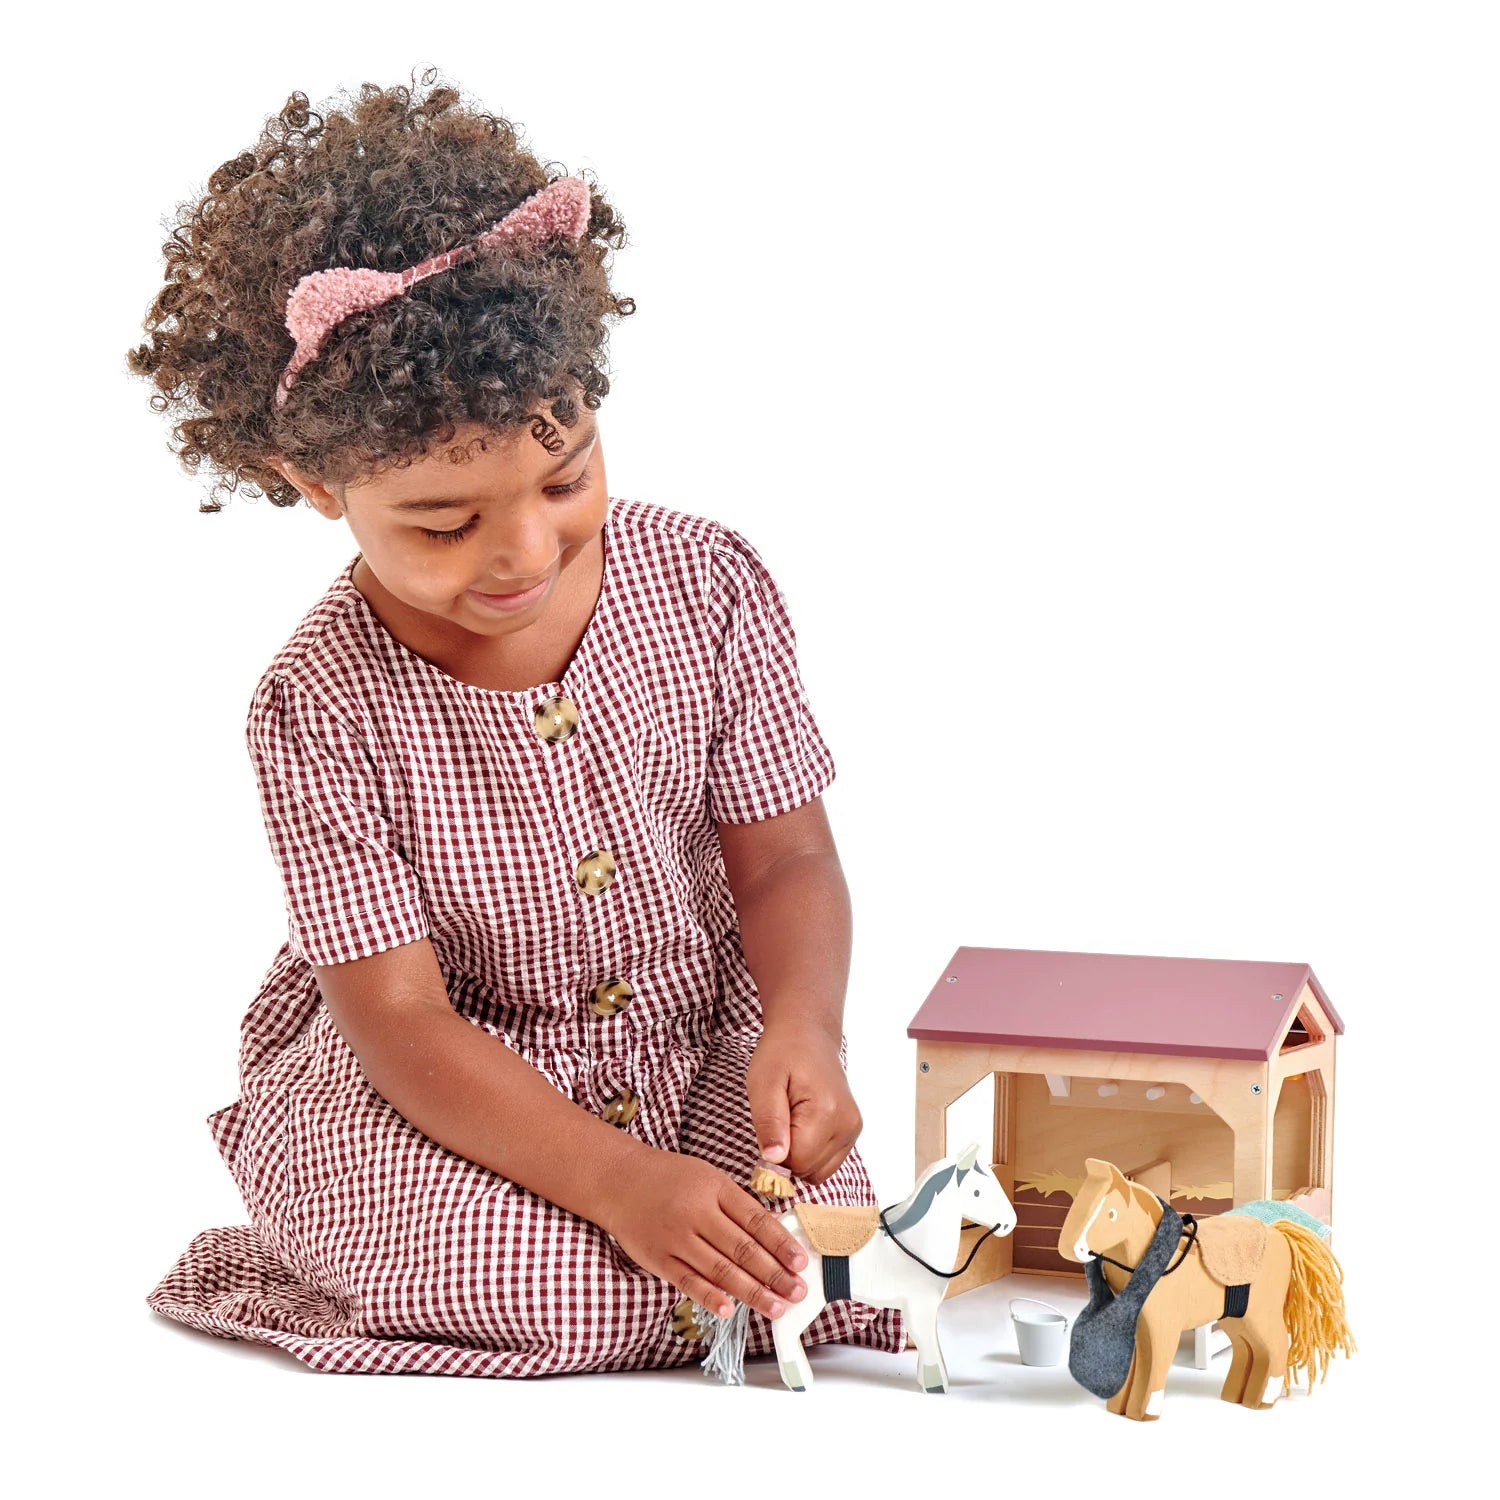 Tender Leaf Toys Miniature Stables Set - Little Reef and Friends